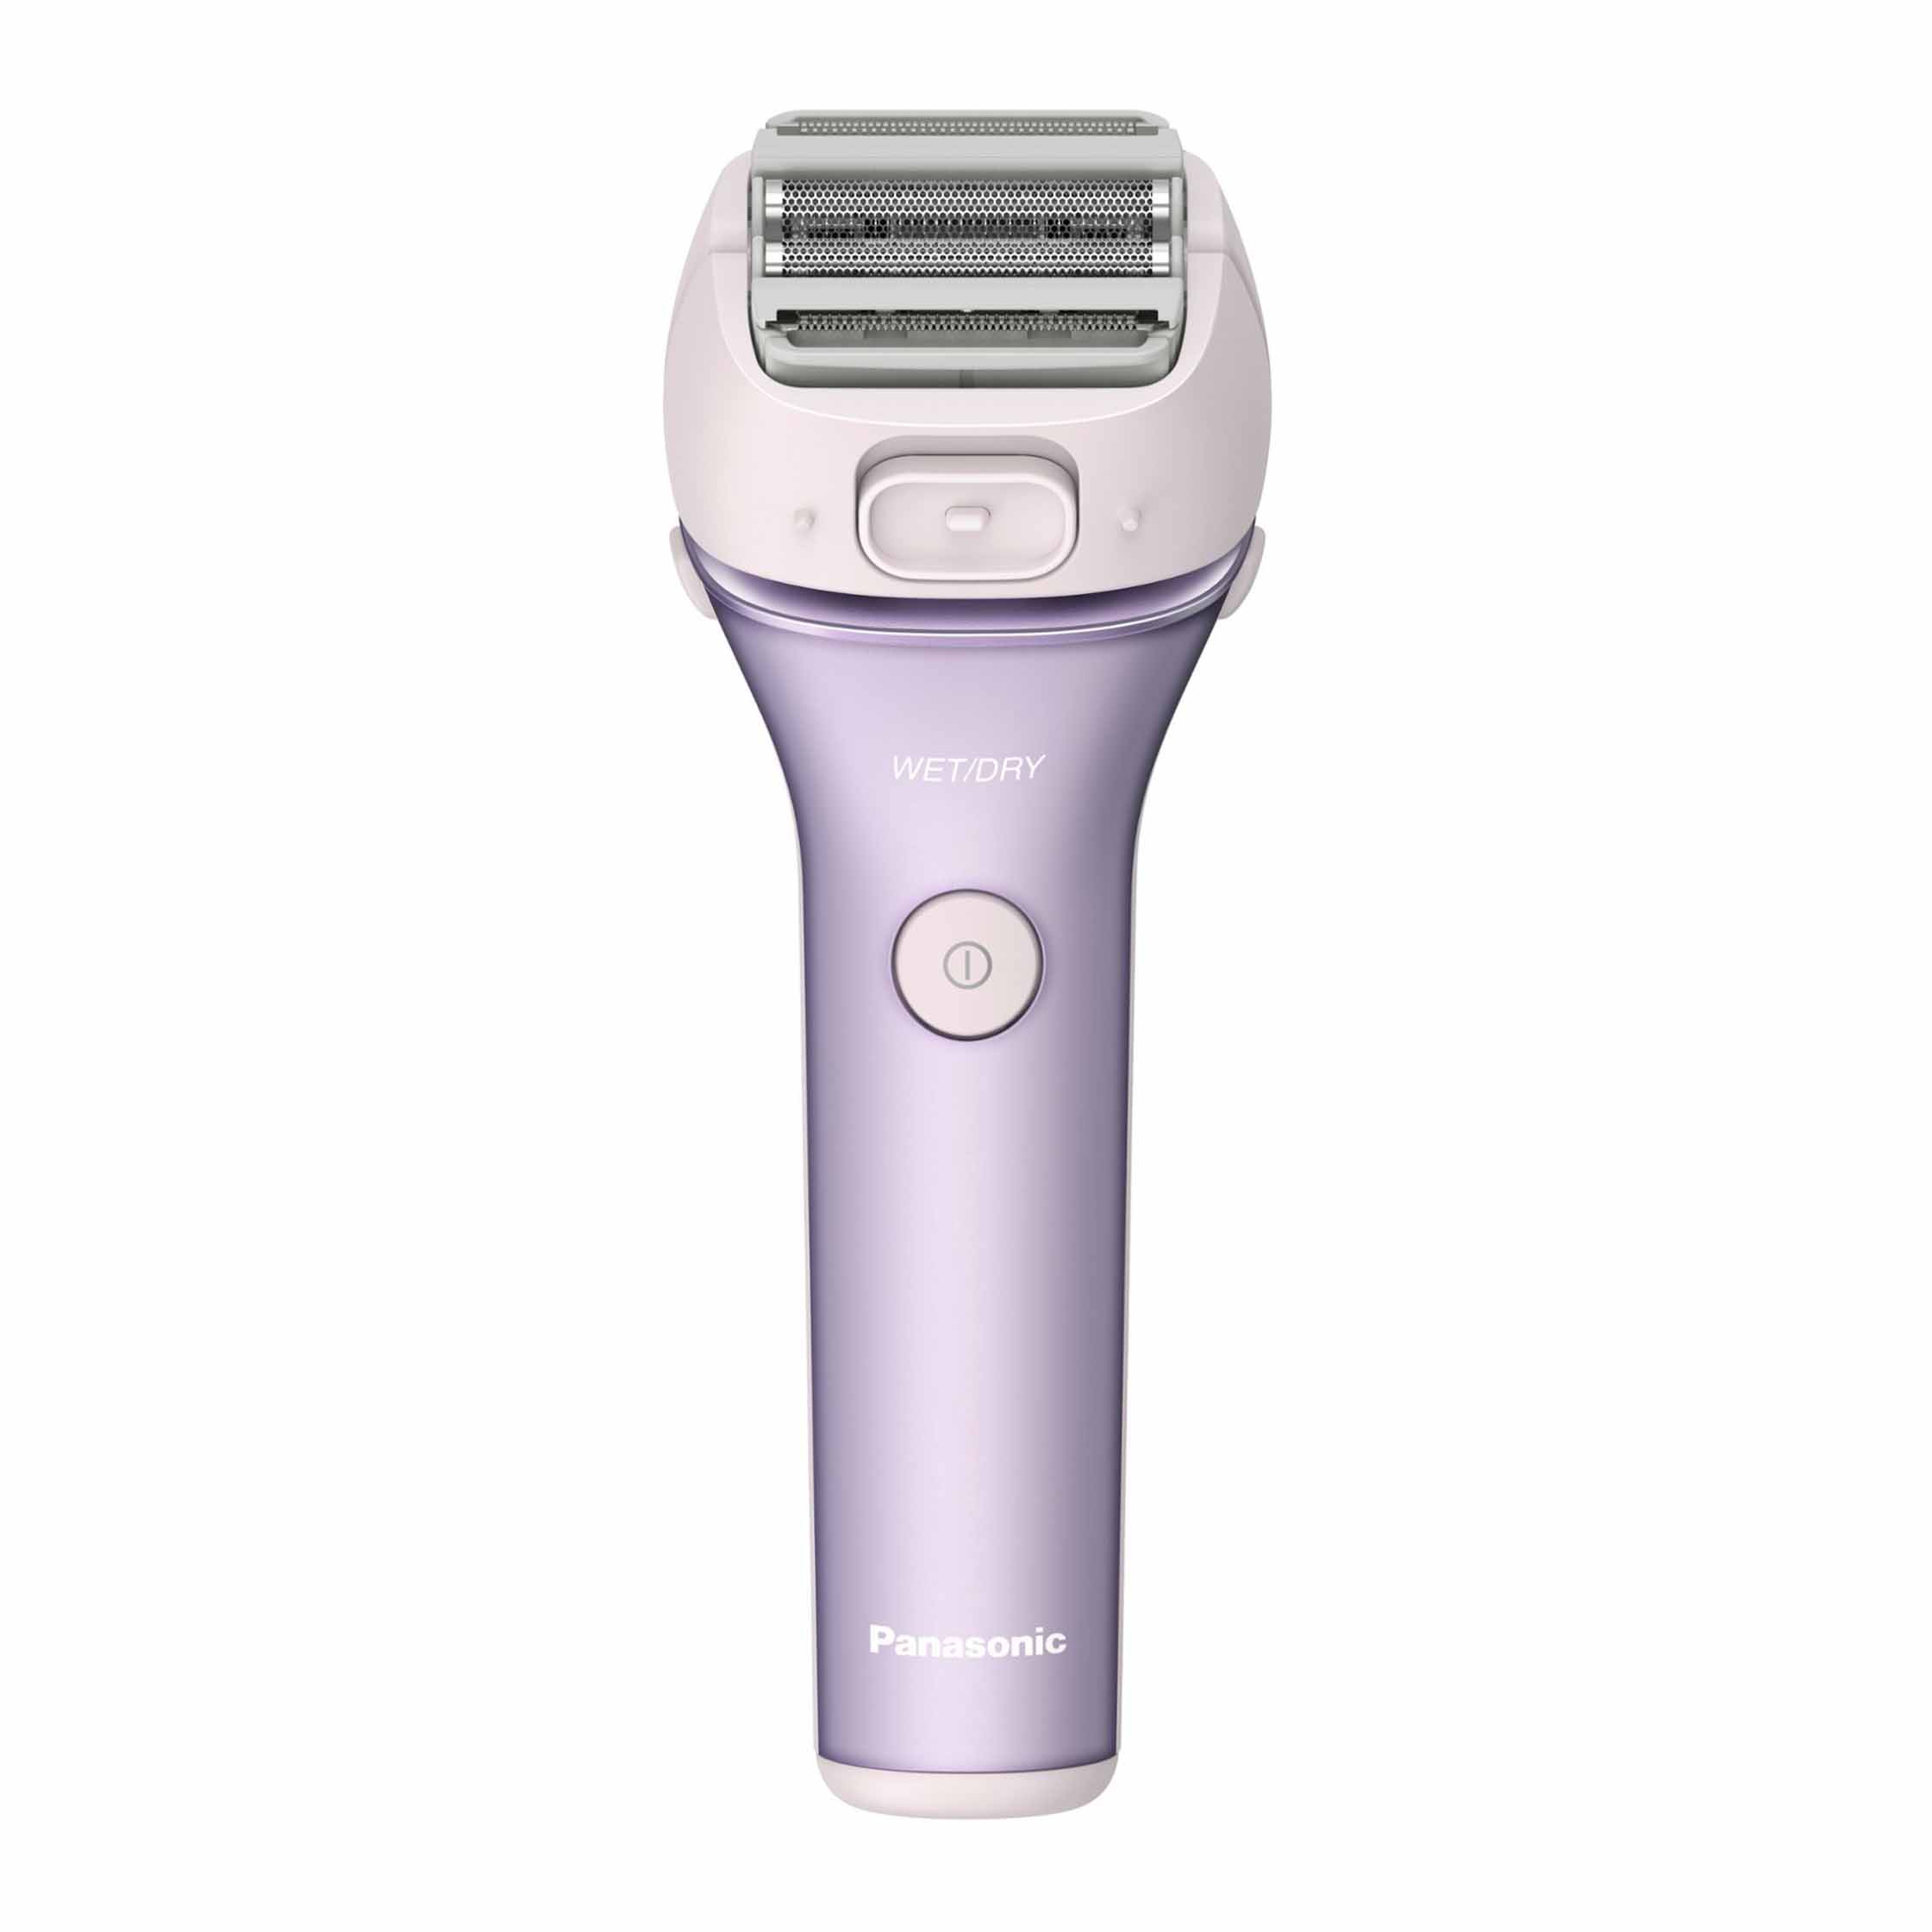 Panasonic CloseCurves ES-WL80-V Rechargeable Wet/Dry Electric Shaver in light purple